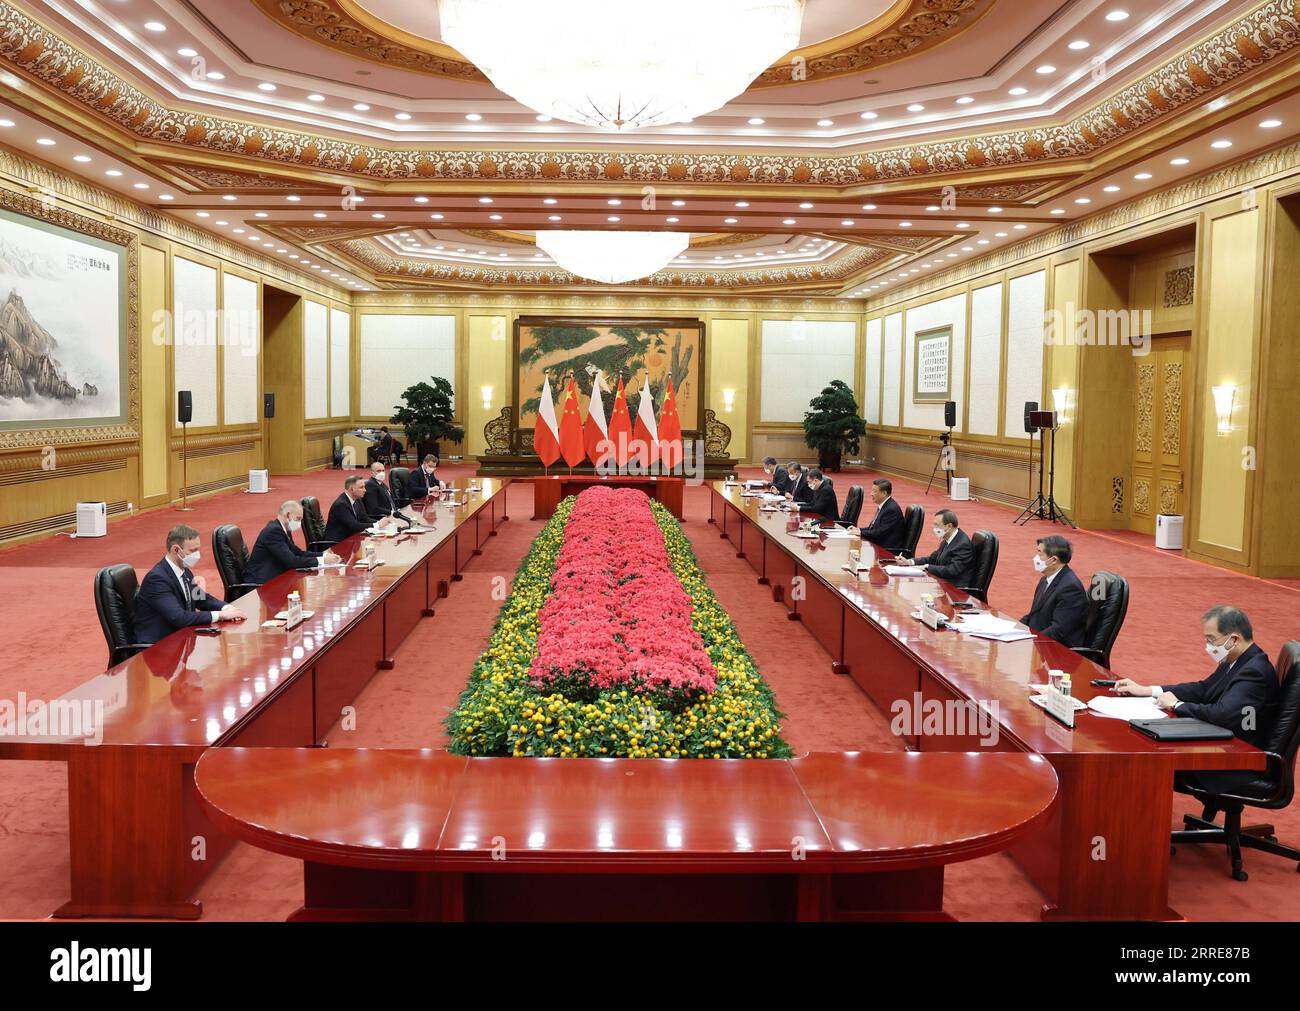 220206 -- BEIJING, Feb. 6, 2022 -- Chinese President Xi Jinping meets with Polish President Andrzej Duda, who came to China for the opening ceremony of the Beijing 2022 Olympic Winter Games, at the Great Hall of the People in Beijing, capital of China, Feb. 6, 2022.  CHINA-BEIJING-XI JINPING-POLISH PRESIDENT-MEETING CN DingxLin PUBLICATIONxNOTxINxCHN Stock Photo